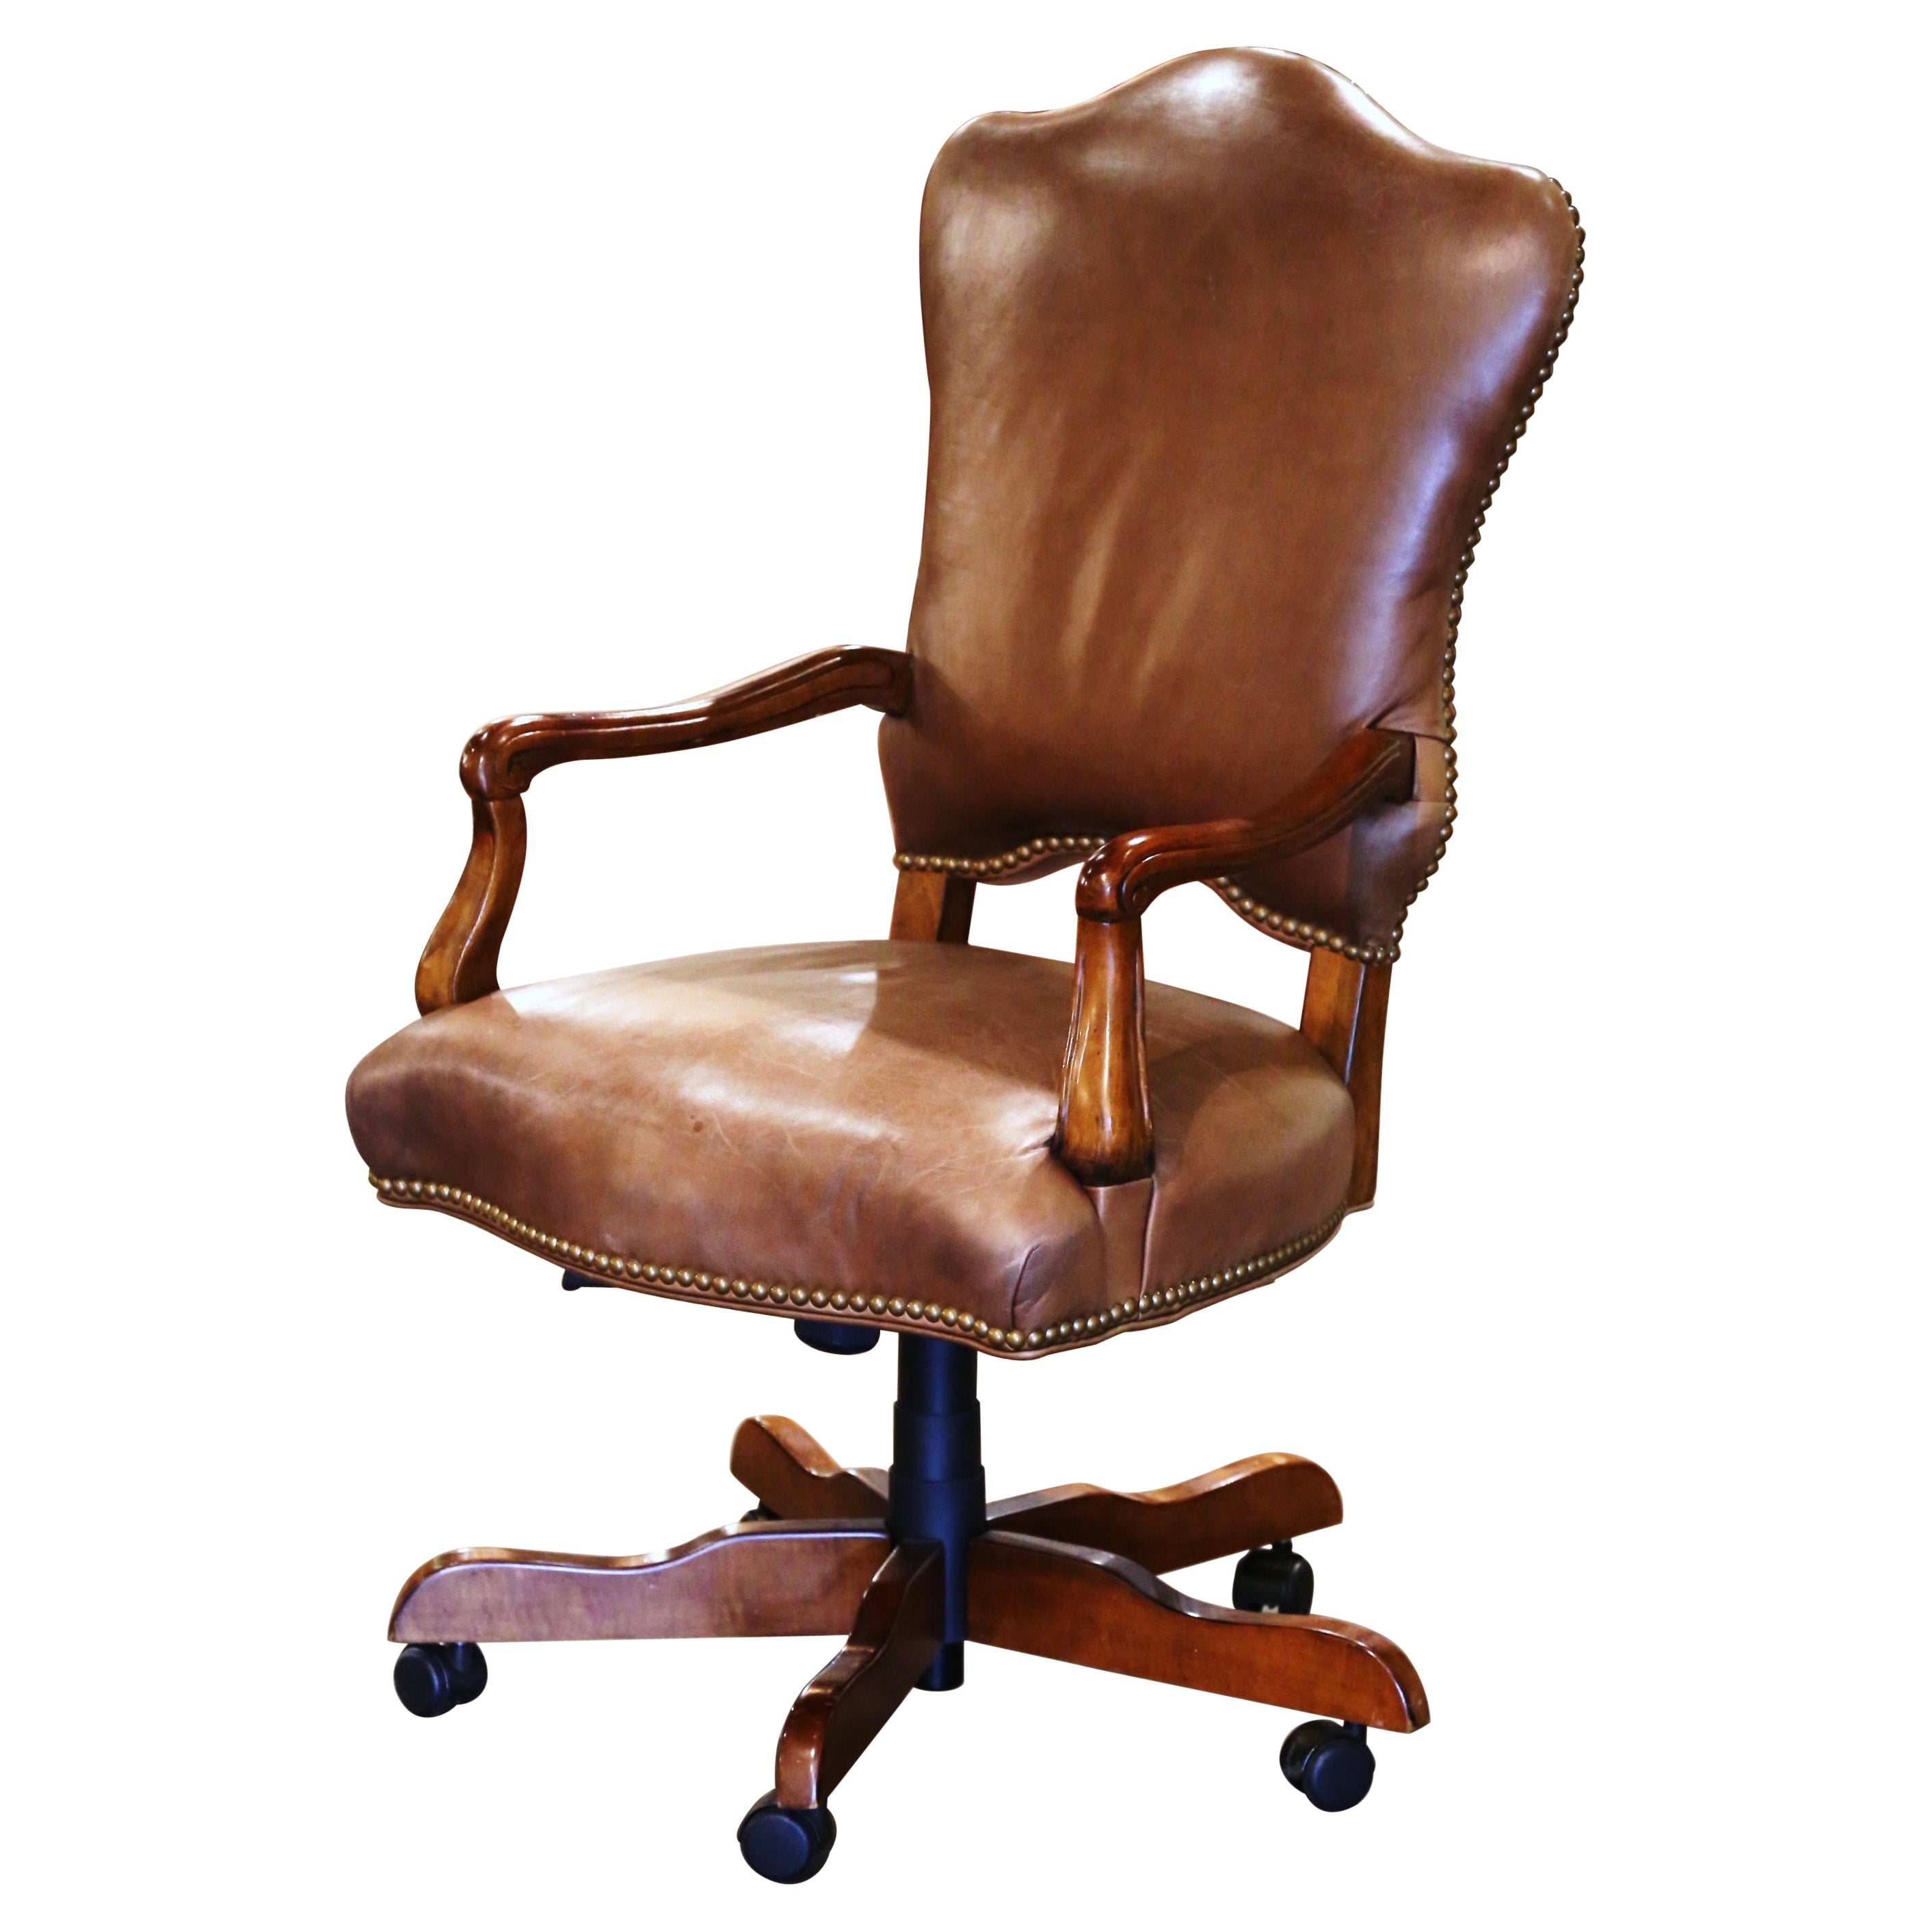 Vintage Adjustable and Swivel Office Desk Armchair with Tan Leather